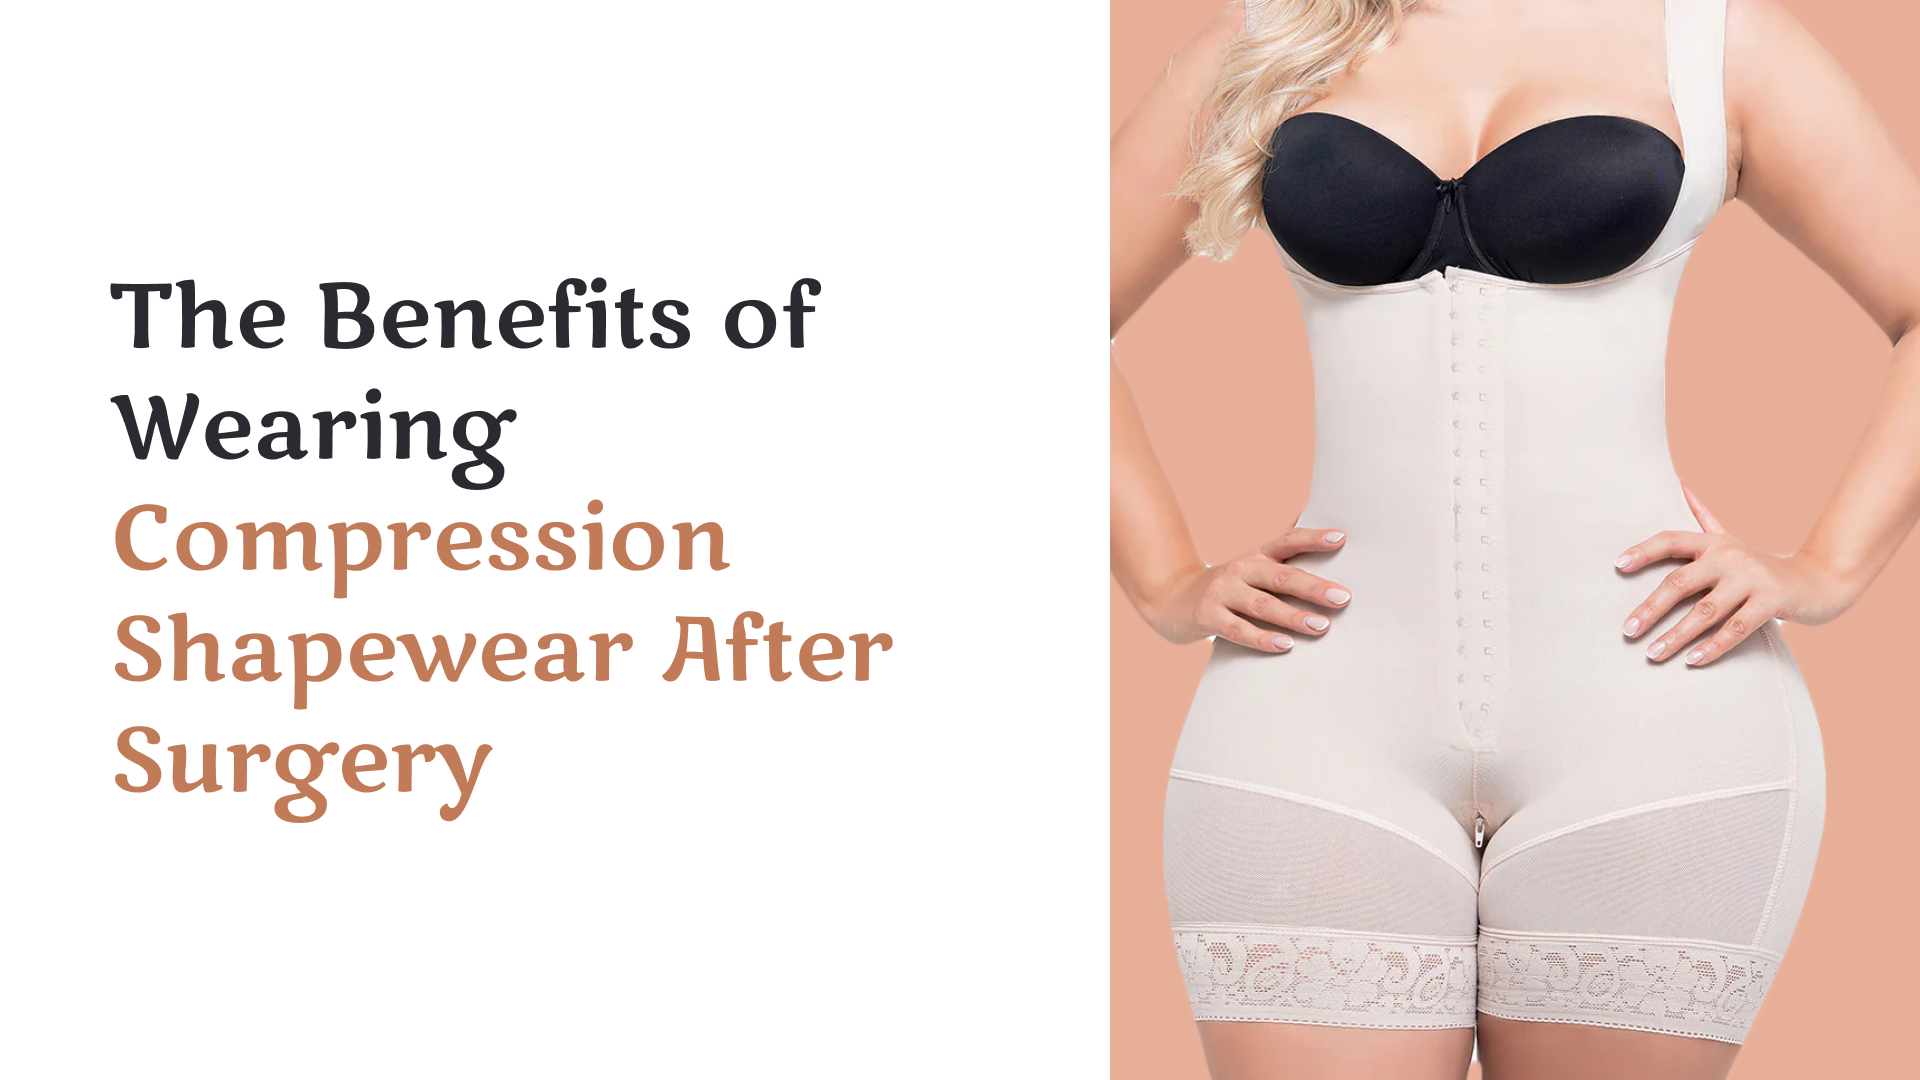 The Benefits of Wearing Compression Shapewear After Surgery